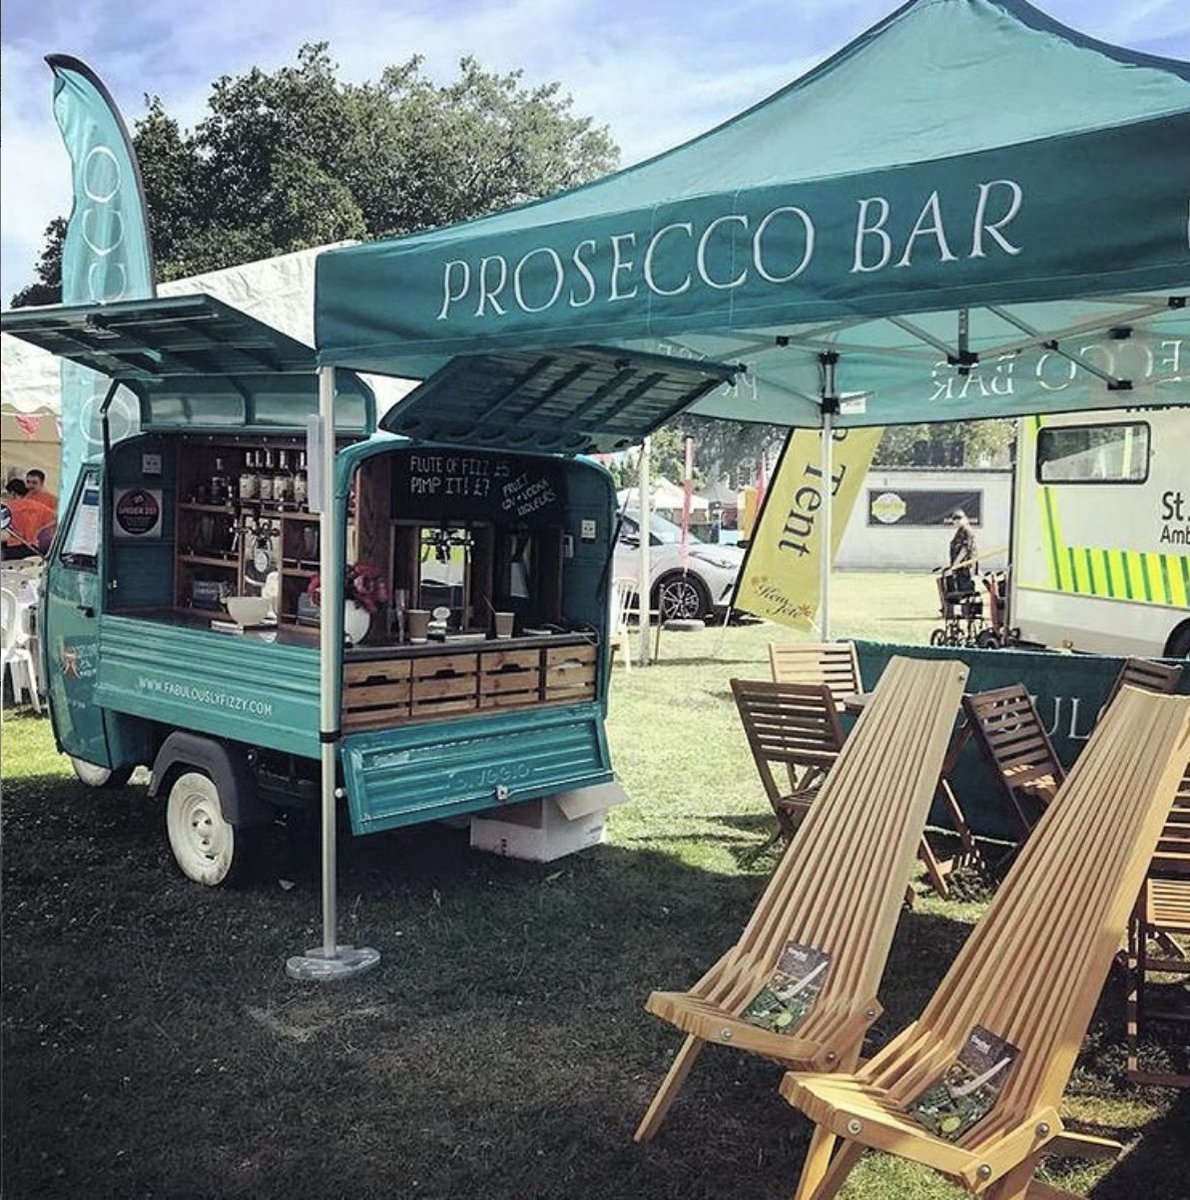 Pop-up Prosecco bar! Great set up. Perfect for outdoor events this summer. This customer opted for a 3m canopro lite shelter and feather flag.
.
.
#surfturfshelters #bespokeprinting #uksmallbiz #popupgazebo #gazebo #uk #ukbankholiday #events #customprinting #uksummer